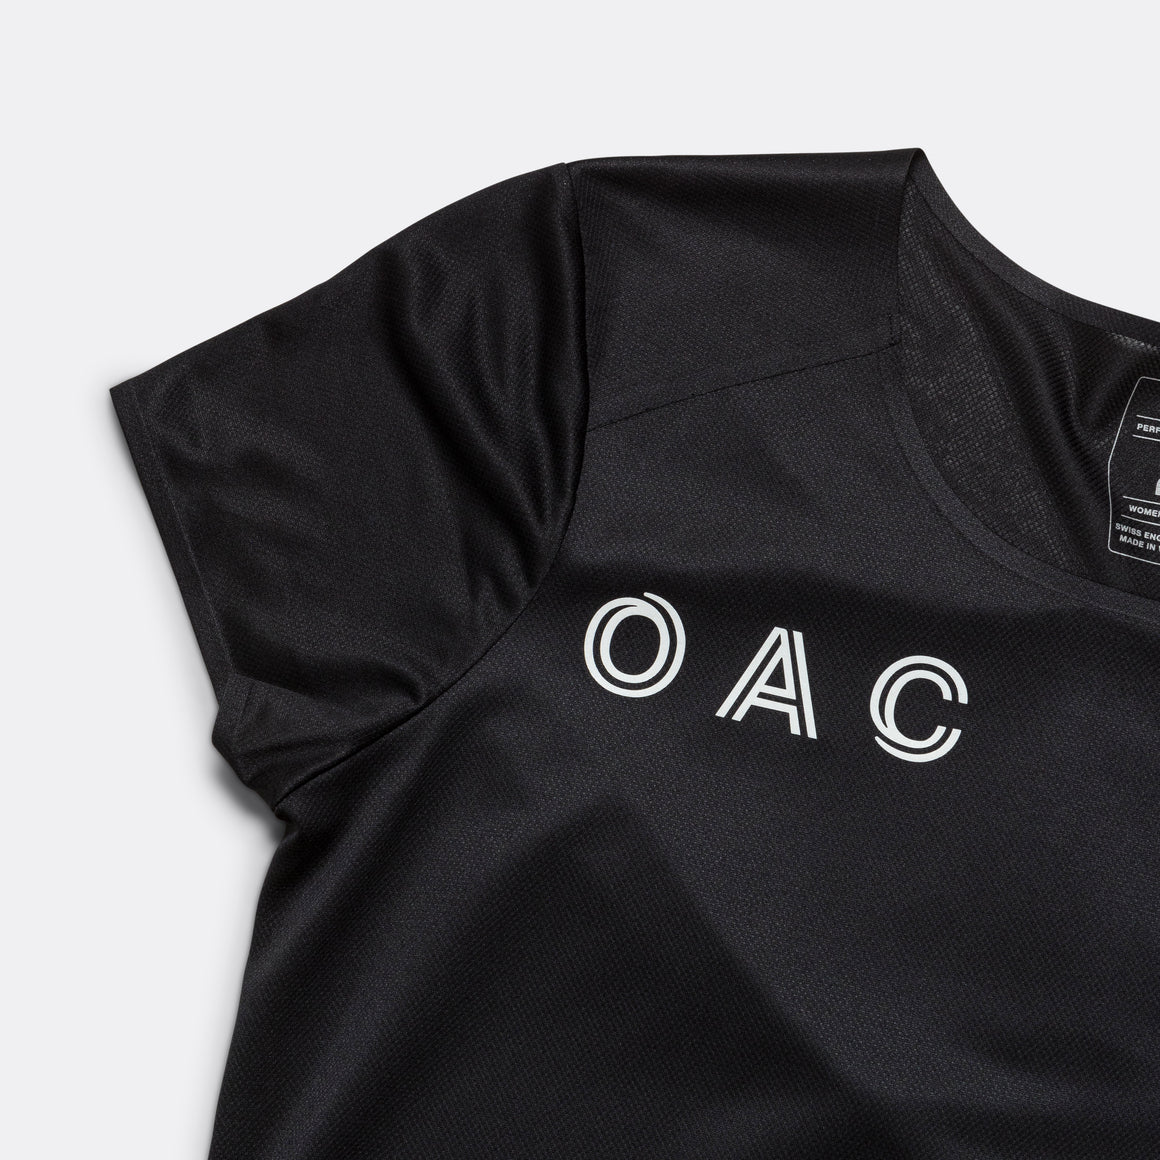 On Running - Womens Performance T-Shirt OAC - Black - Up There Athletics